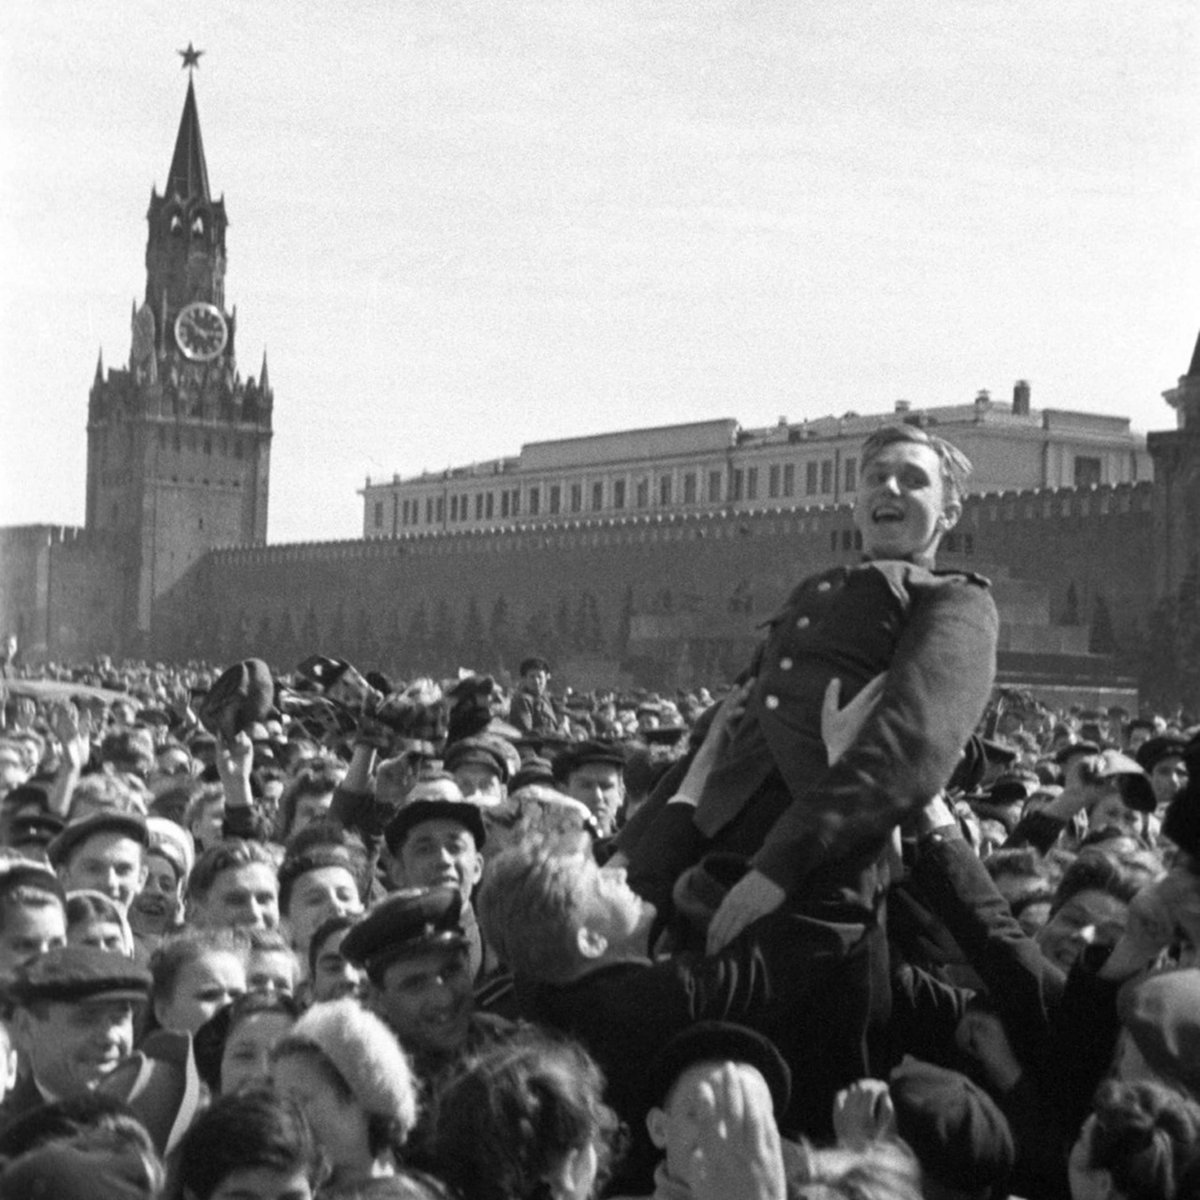 Muscovites rejoicing at the victory over Nazi Germany Red Square, 1945 (photo by Alexander Krasavin)